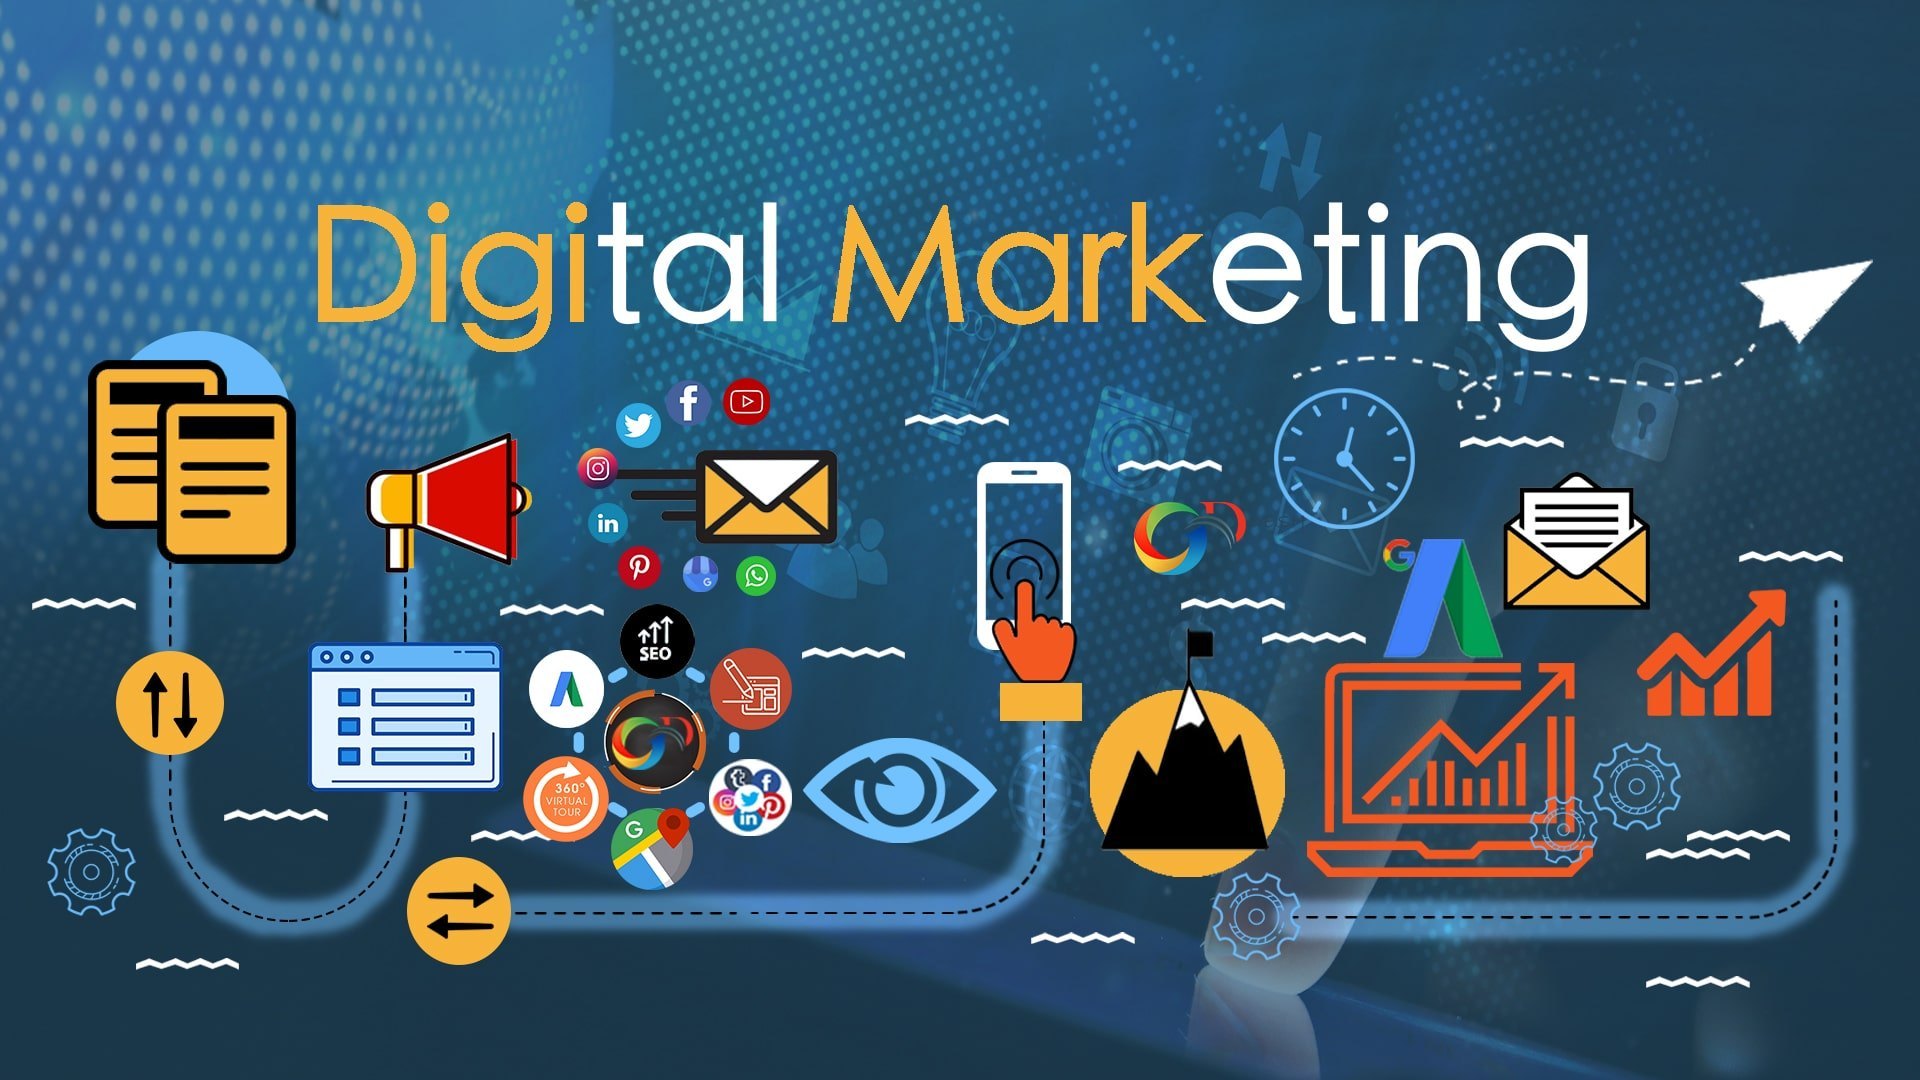 Business Development & Digital Marketing Strategy for The Smile Media in the USA,The Smile Media, Business Development &amp; Digital Marketing Strategy for The Smile Media in the USA, Best Digital Marketing Company in Gurgaon